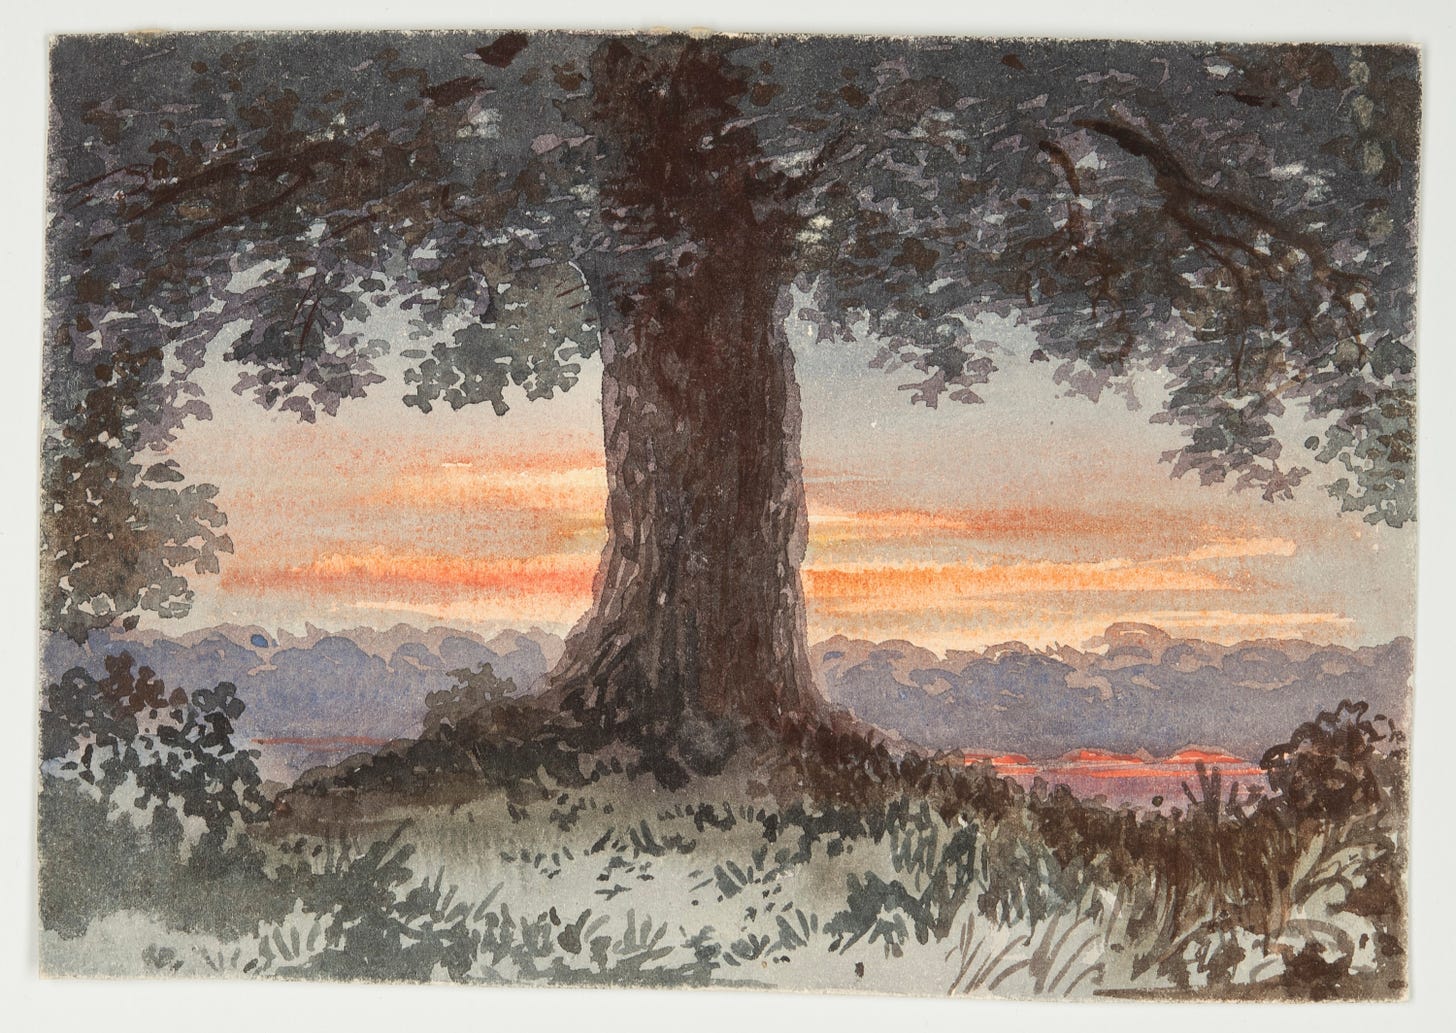 Landscape with a tree trunk in the foreground, red sky in the background.